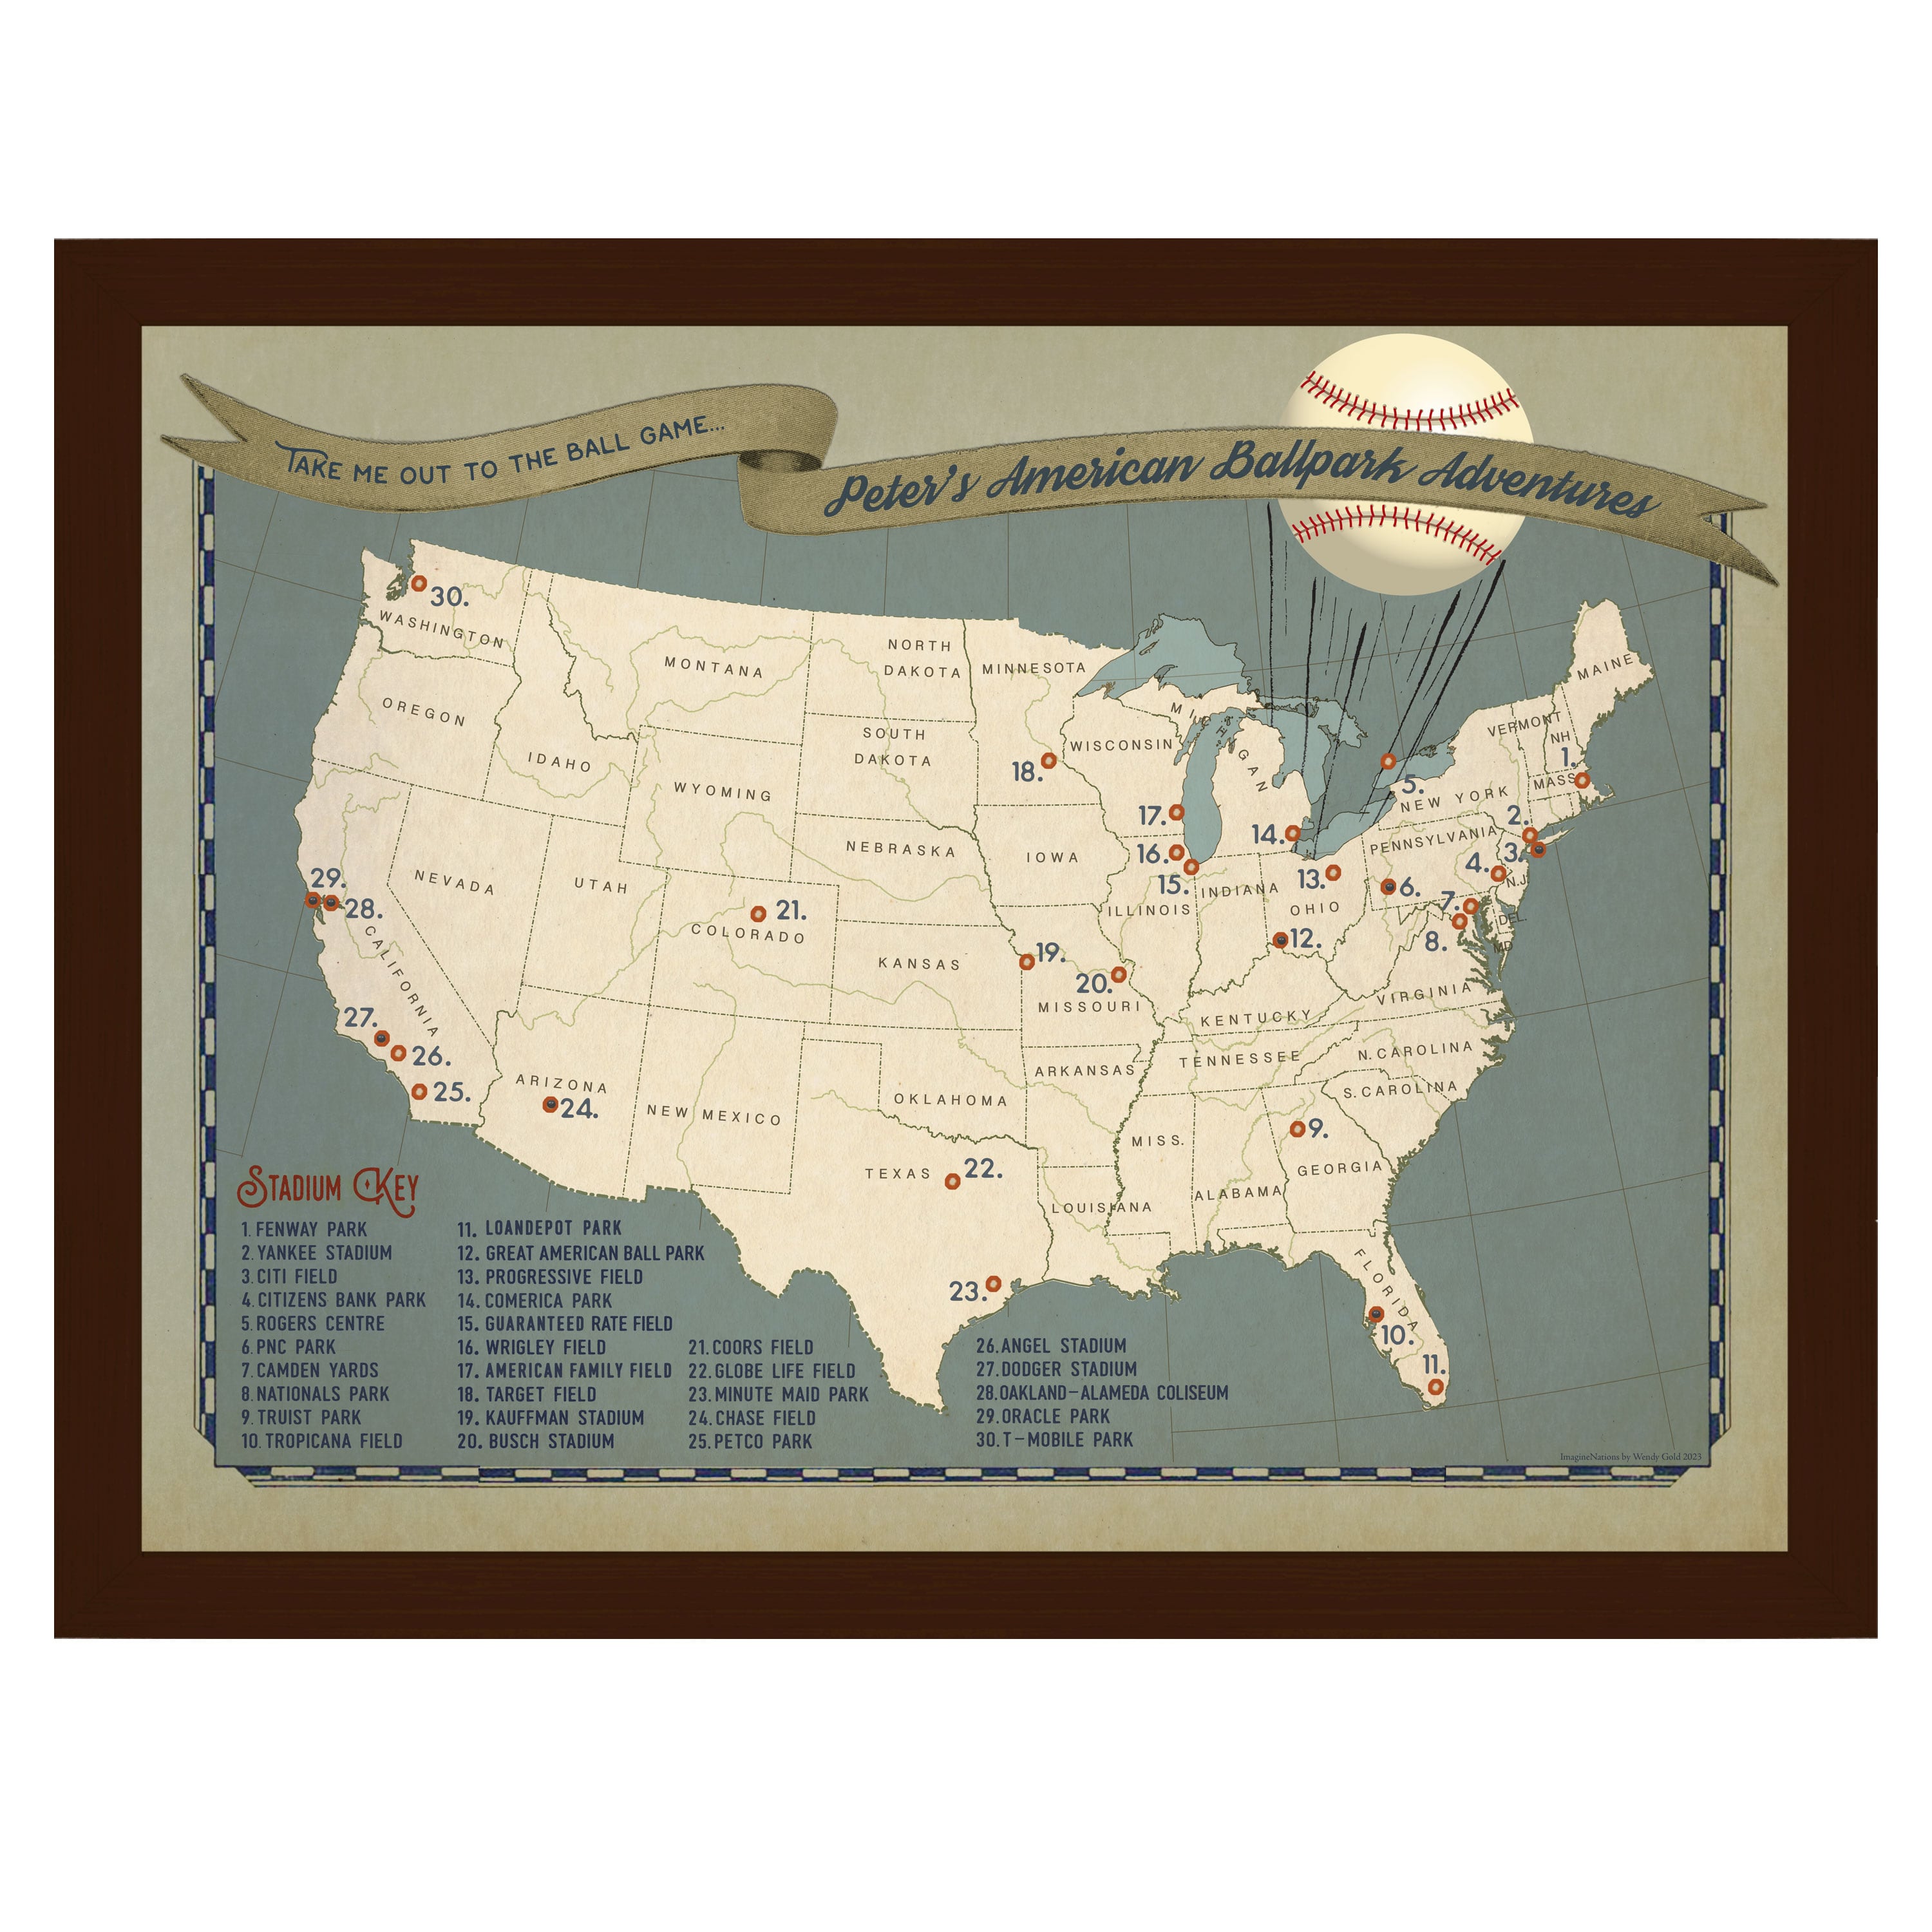 Major League Baseball Pushpin Map - Mark your travels to your favorite MLB  baseball stadiums - Sports Decor - Perfect for the baseball fan - Includes